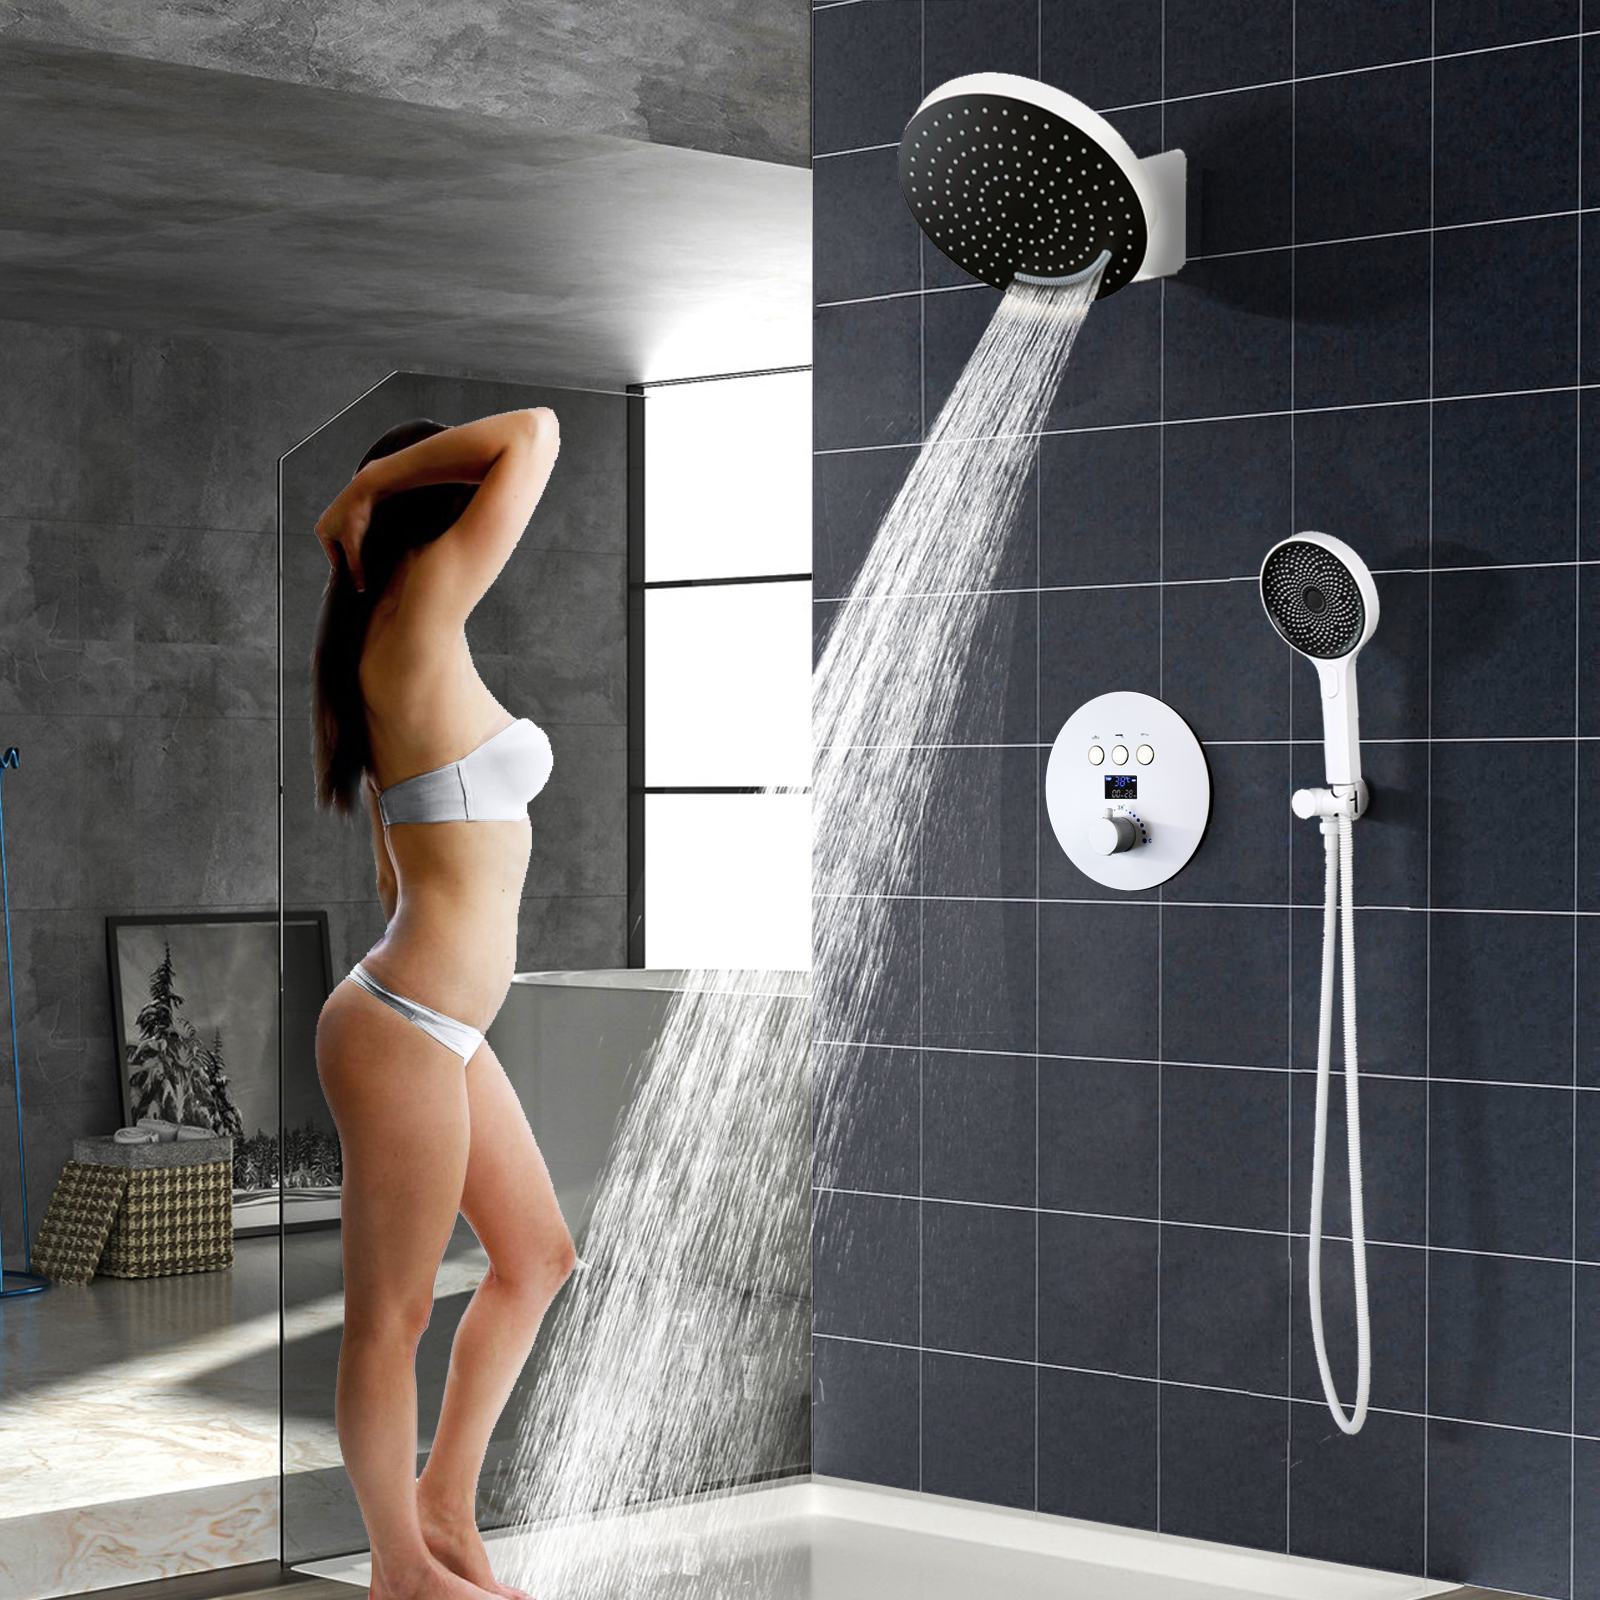 Concealed Shower with Wall Mounted Embedded Shower Set, Concealed Ceiling Shower in Household Bathroom